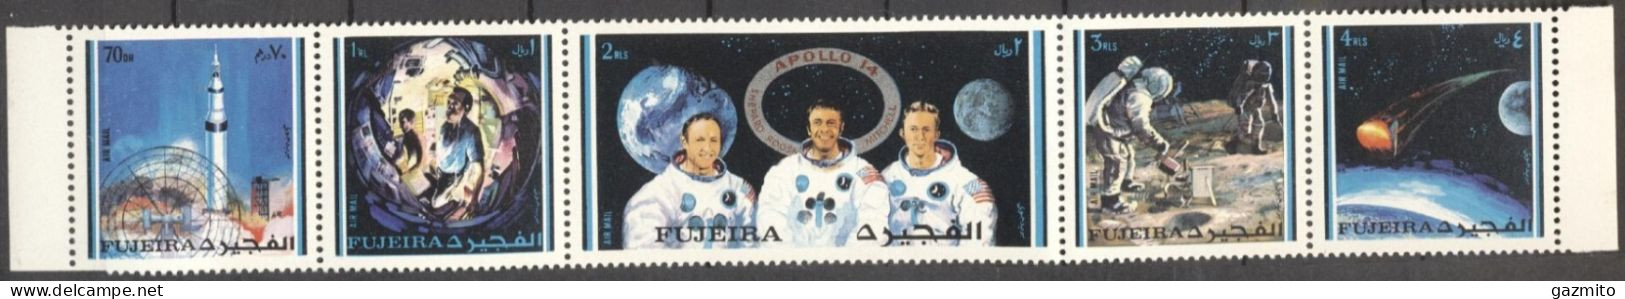 Fujeira 1971, Space, First Man On The Moon, 5val. - Fujeira